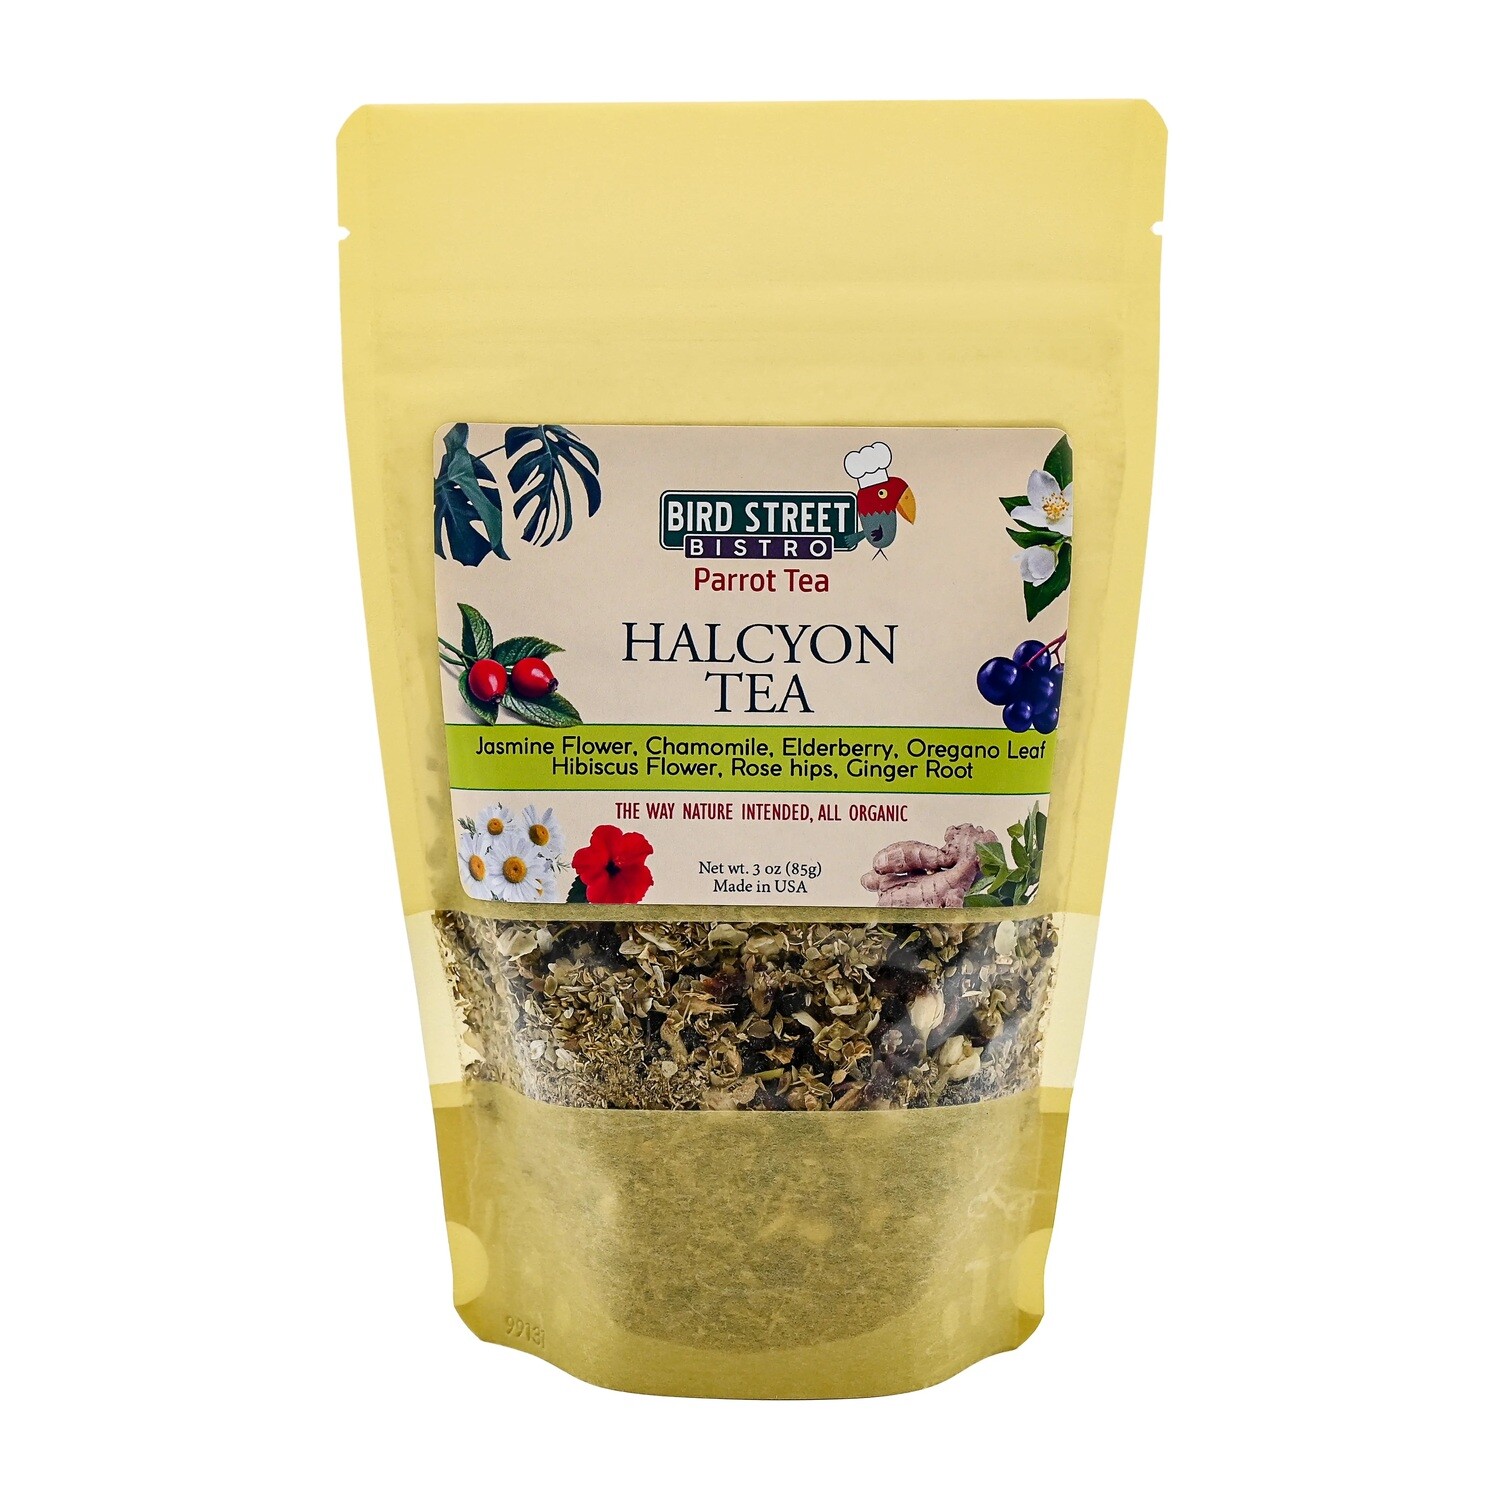 HALCYON TEA - PARROT TEA 100% Organic, human grade healing herbs. Halcyon Tea's mixture of organic herbal tea is specifically made for your feathered friend. The calming and anti-inflammatory properti